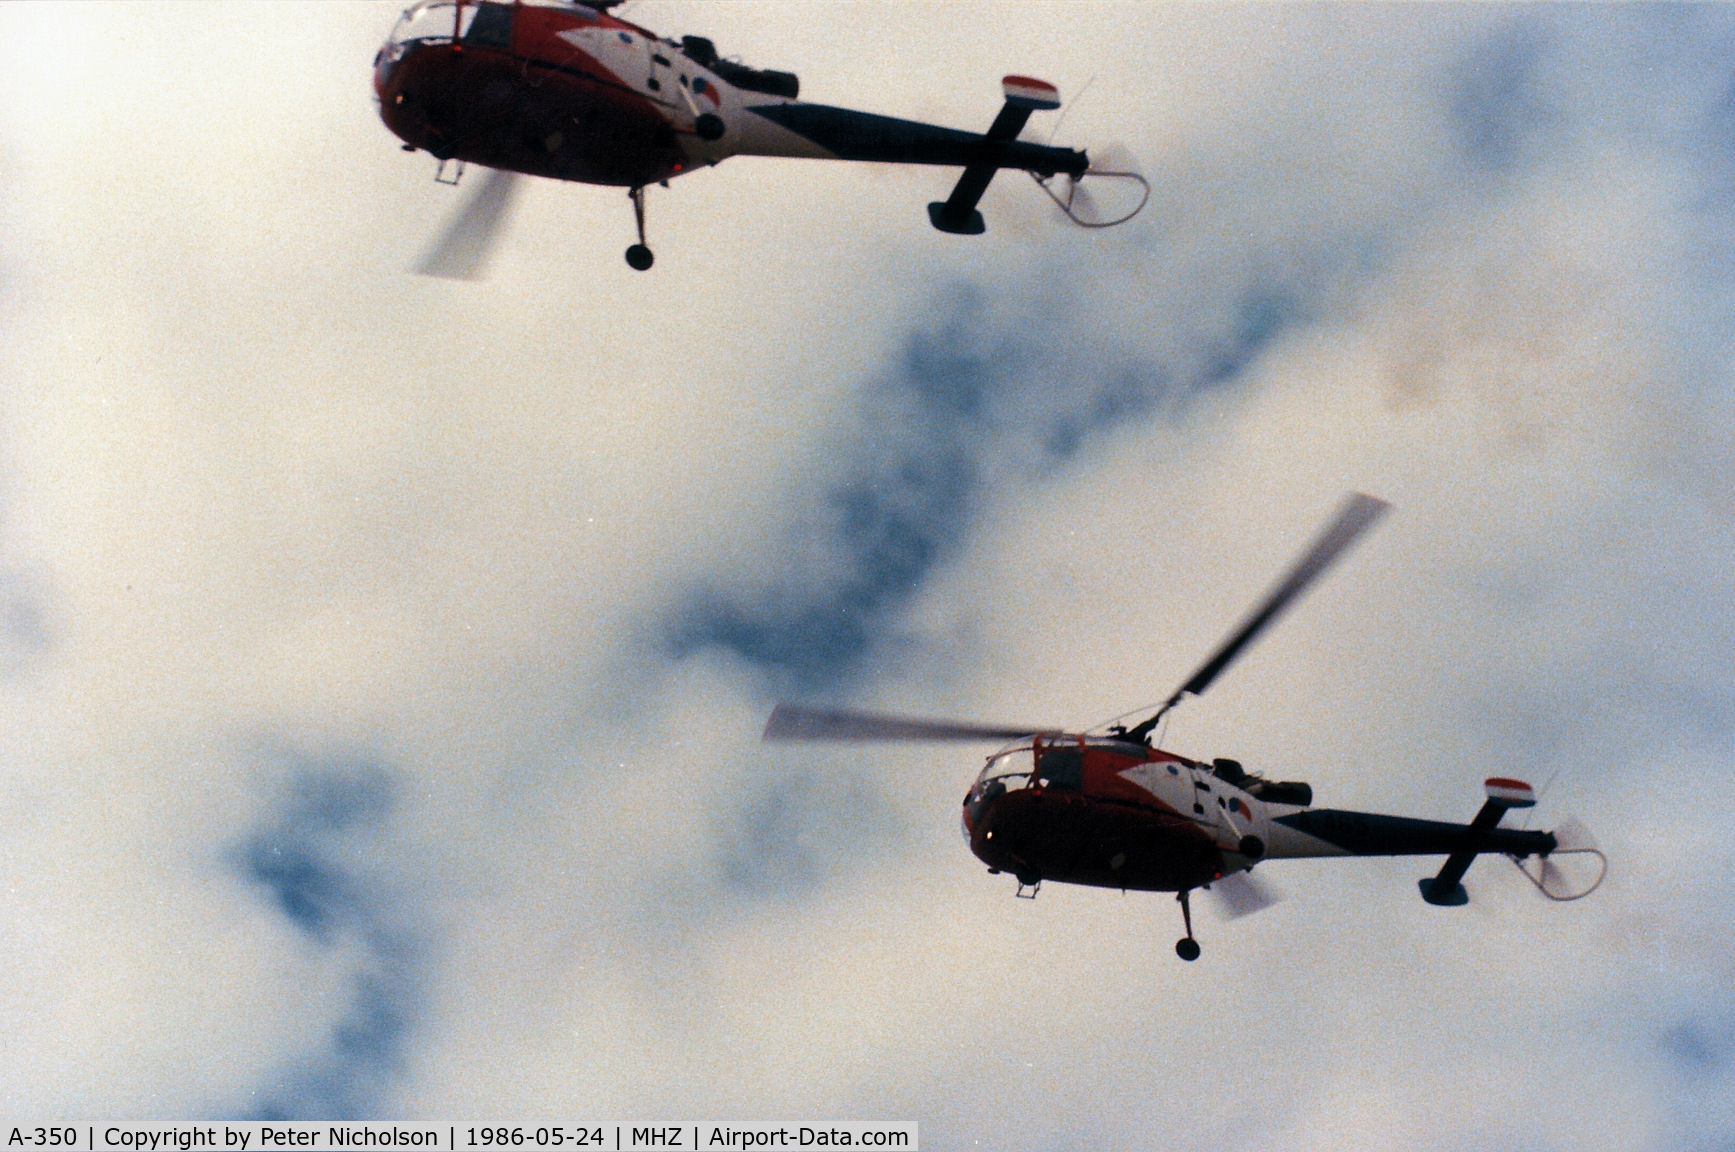 A-350, Sud SE-3160 Alouette III C/N 1350, Alouette III of the Royal Netherlands Air Force's Grasshoppers aerial display team in action at the 1986 RAF Mildenhall Air Fete.